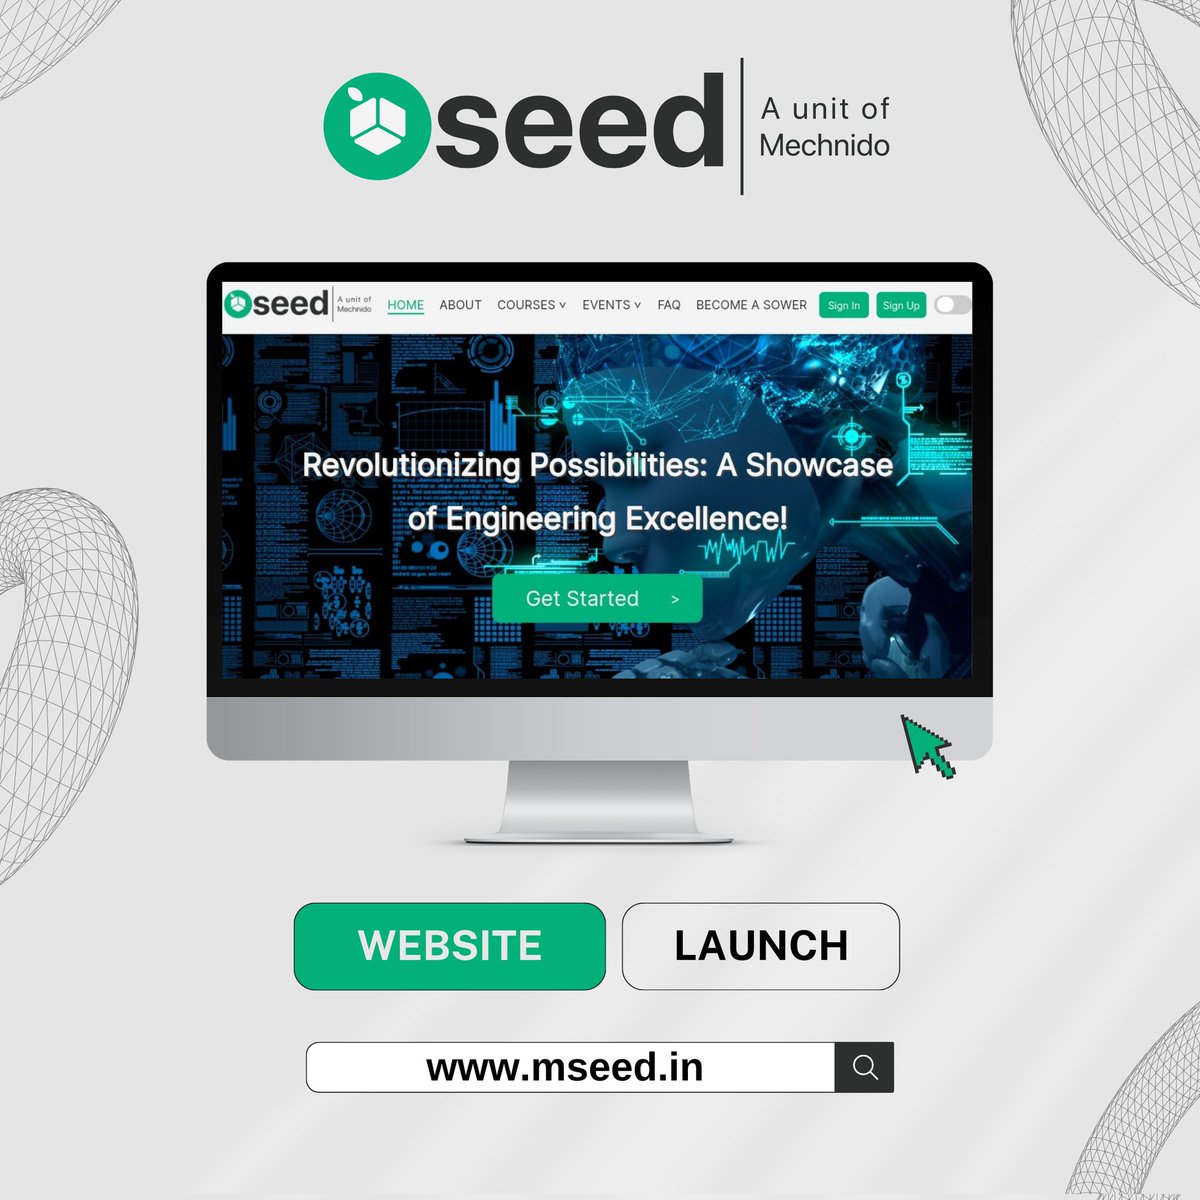 Seed - A Unit of Mechnido 'Website Launch '

#EducationElevated #events #EmpoweringMinds #TamilNaduEducation #InnovationInLearning #launching #course #technology #nontechnical #revealing #Tn  #mechnido  #seed #mechnidoseed #website #launching